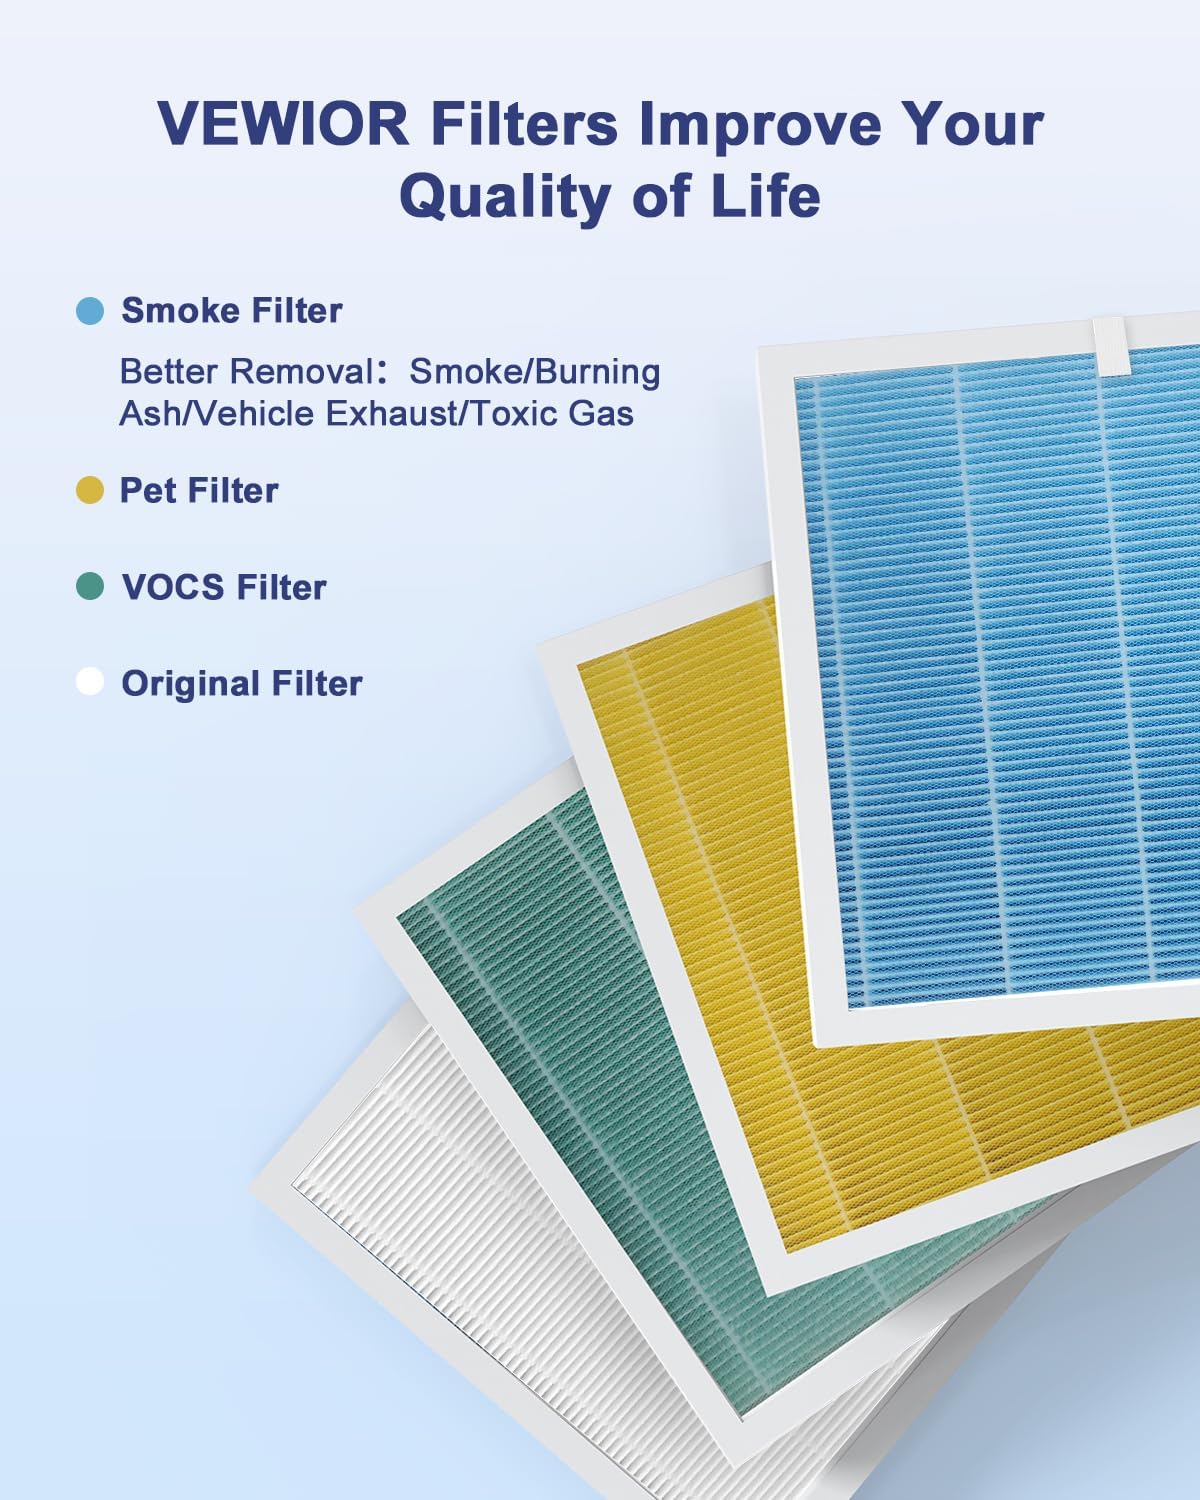 VEWIOR Official Replacement Filter True HEPA Replacement Filter, Compatible VEWIOR A3N Air Purifier, H13 True HEPA Filter for A3N Air Cleaner, Smoke Filter